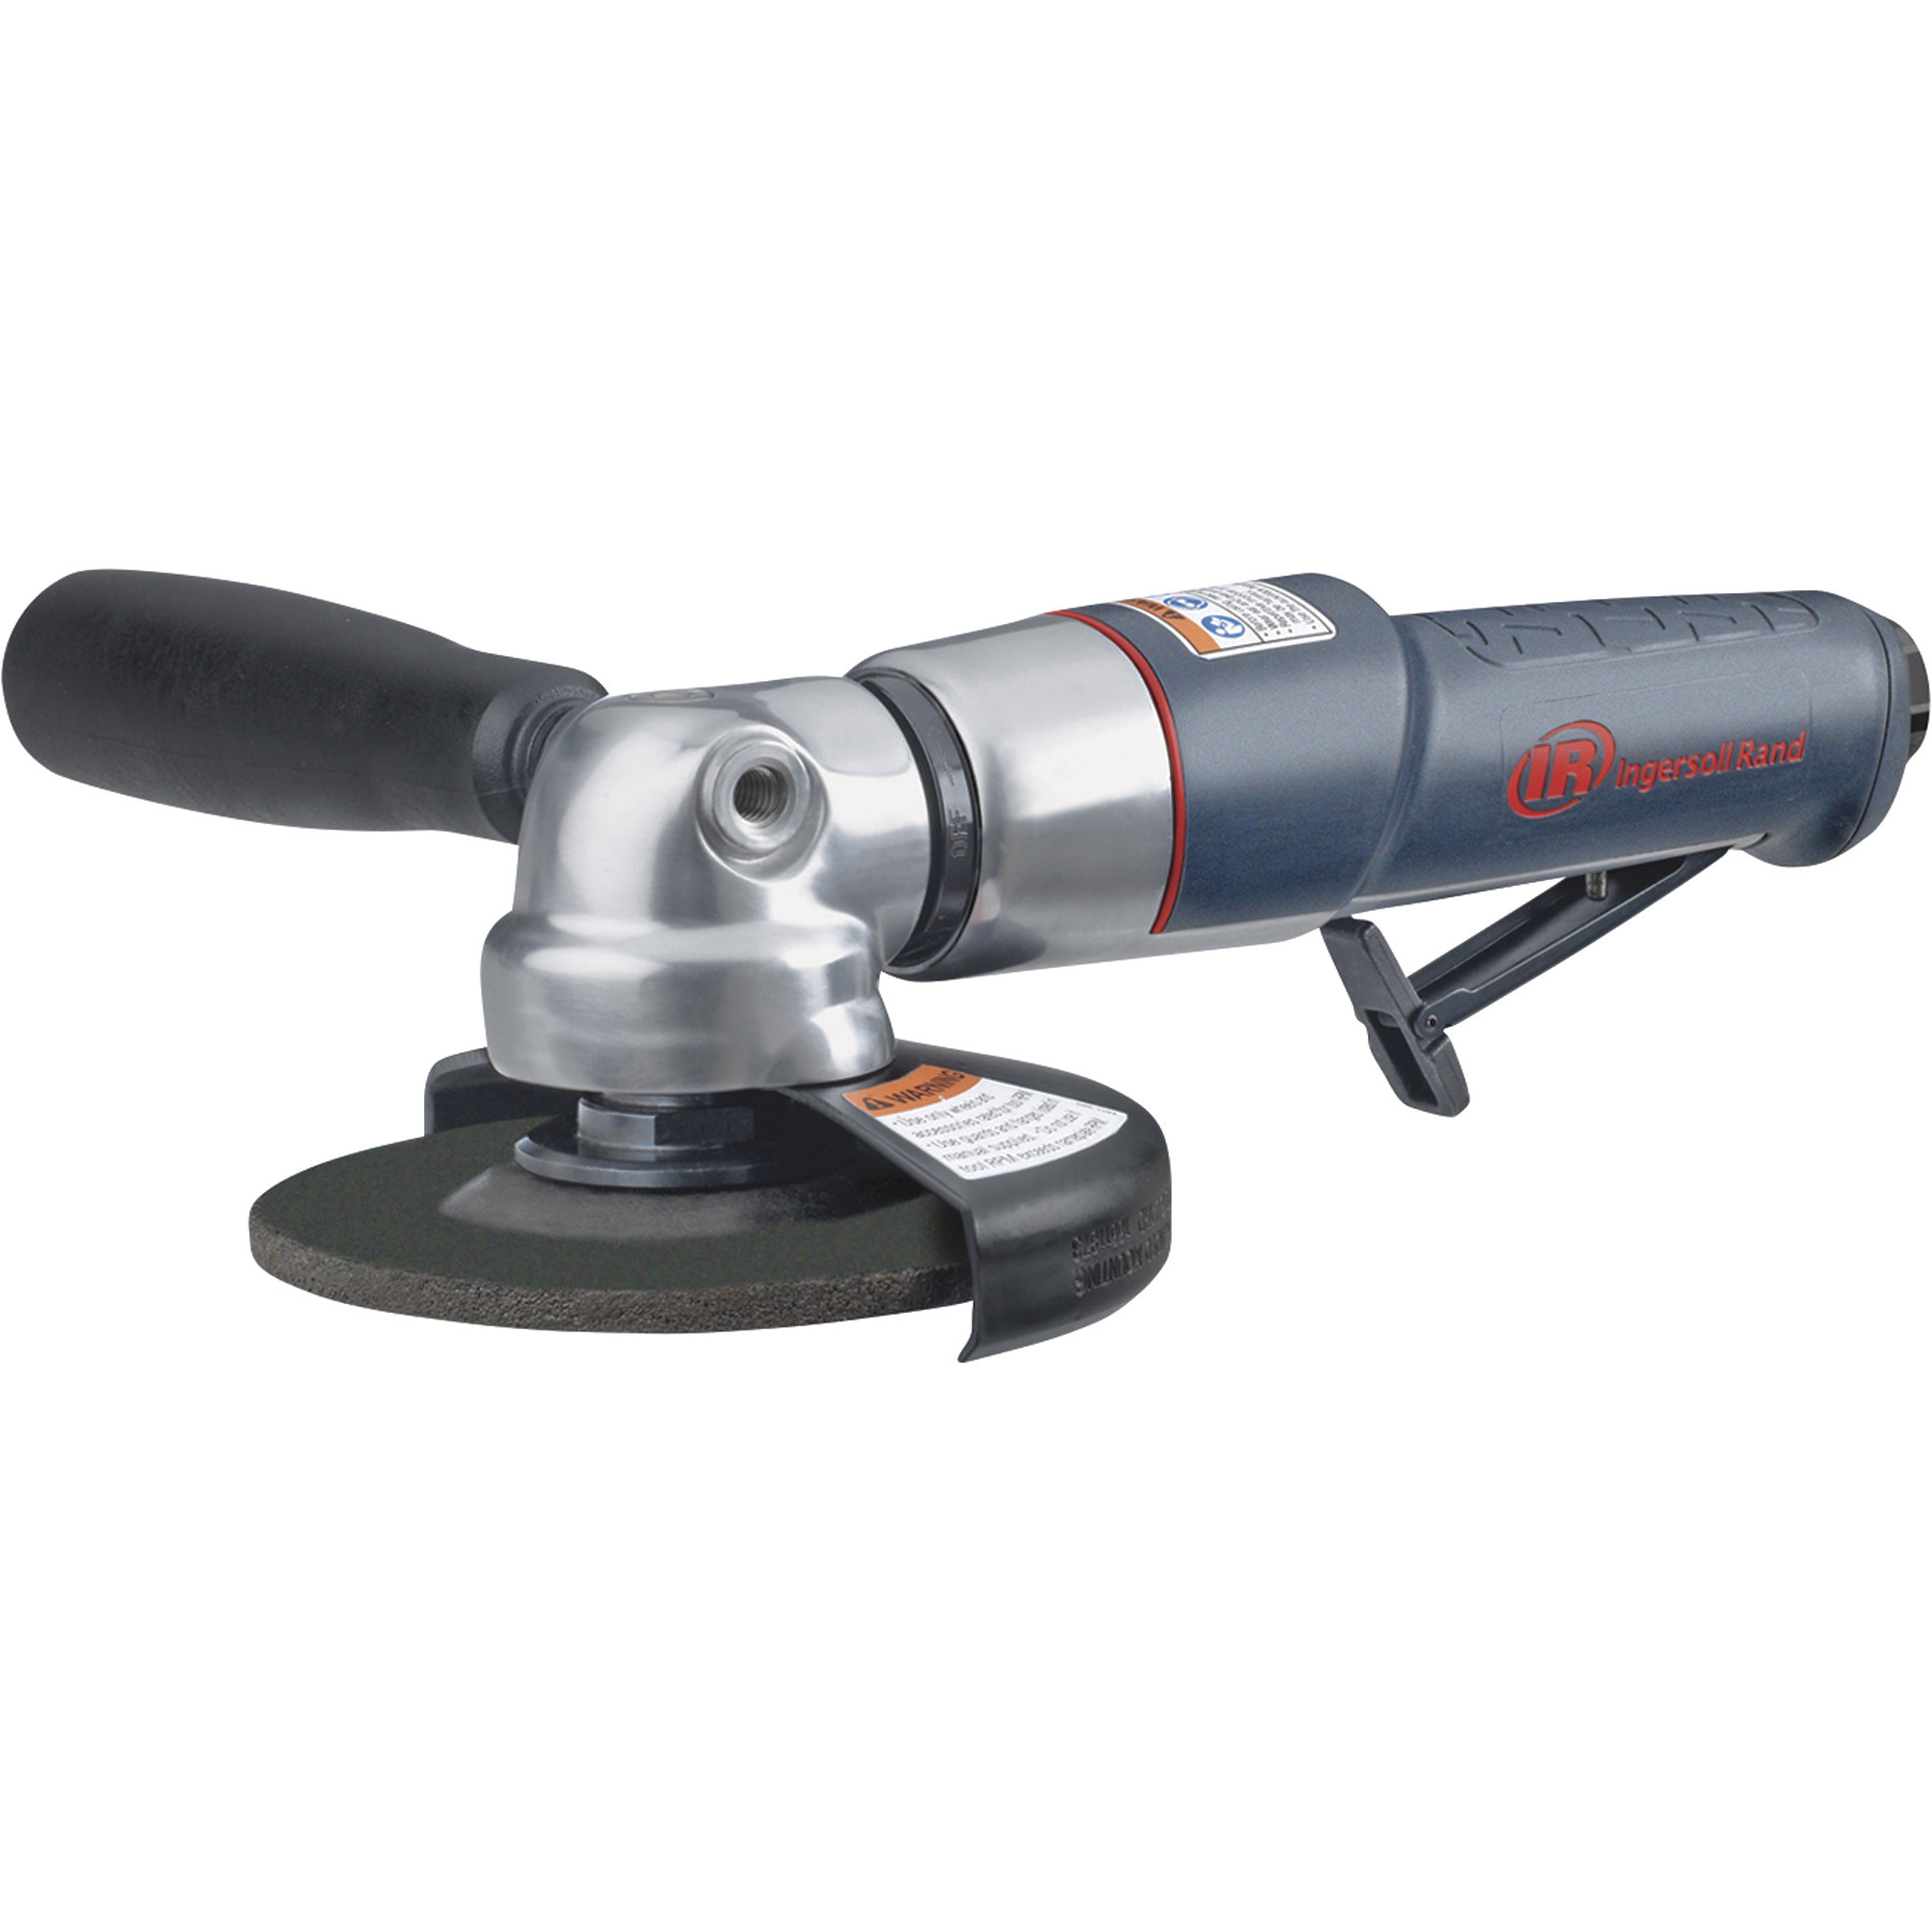 Ingersoll Rand Air Angle Grinder, 1/4Inch Inlet, 9 CFM, 12,000 RPM, Model 3445MAX